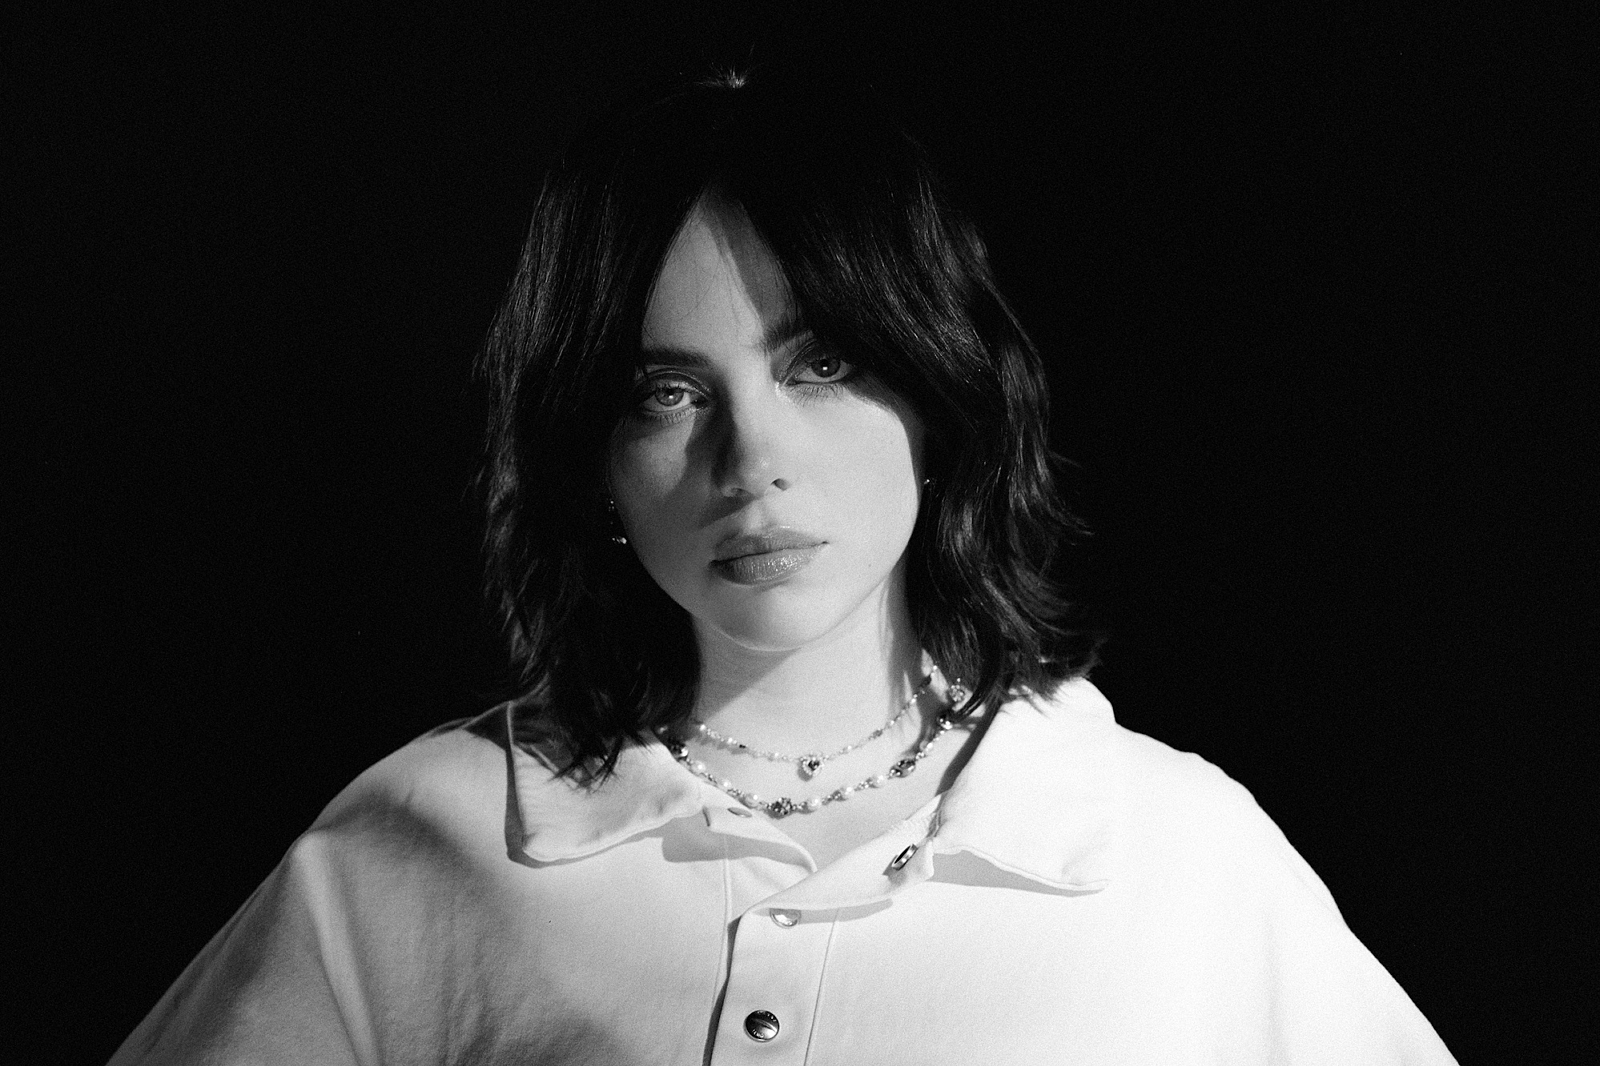 Tracks: Billie Eilish, Muse, Lucy Dacus and more